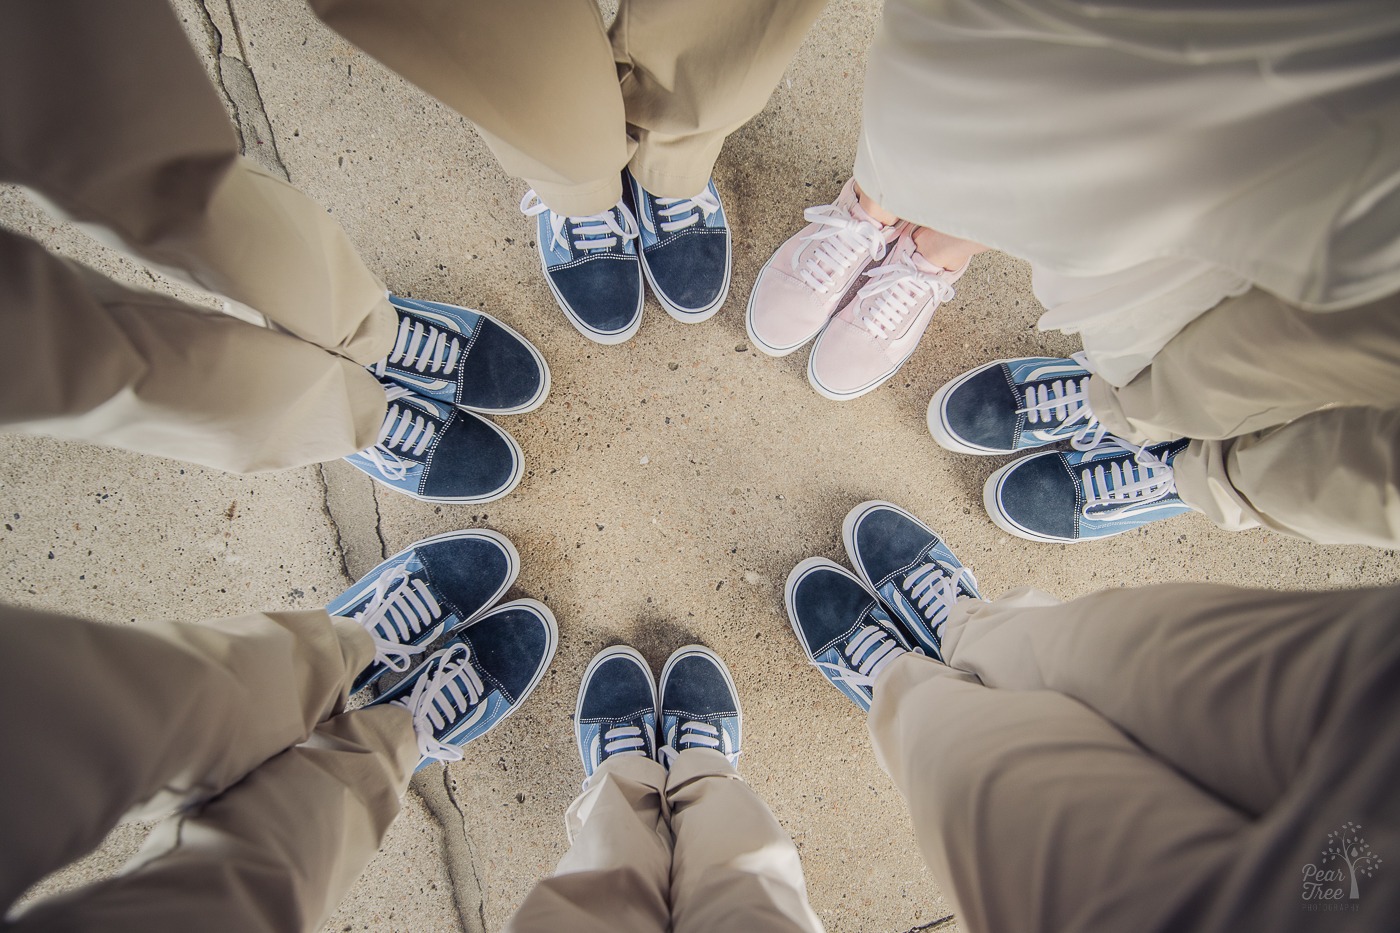 Six pairs of blue shoes and one pink for the bride as they stand in a circle